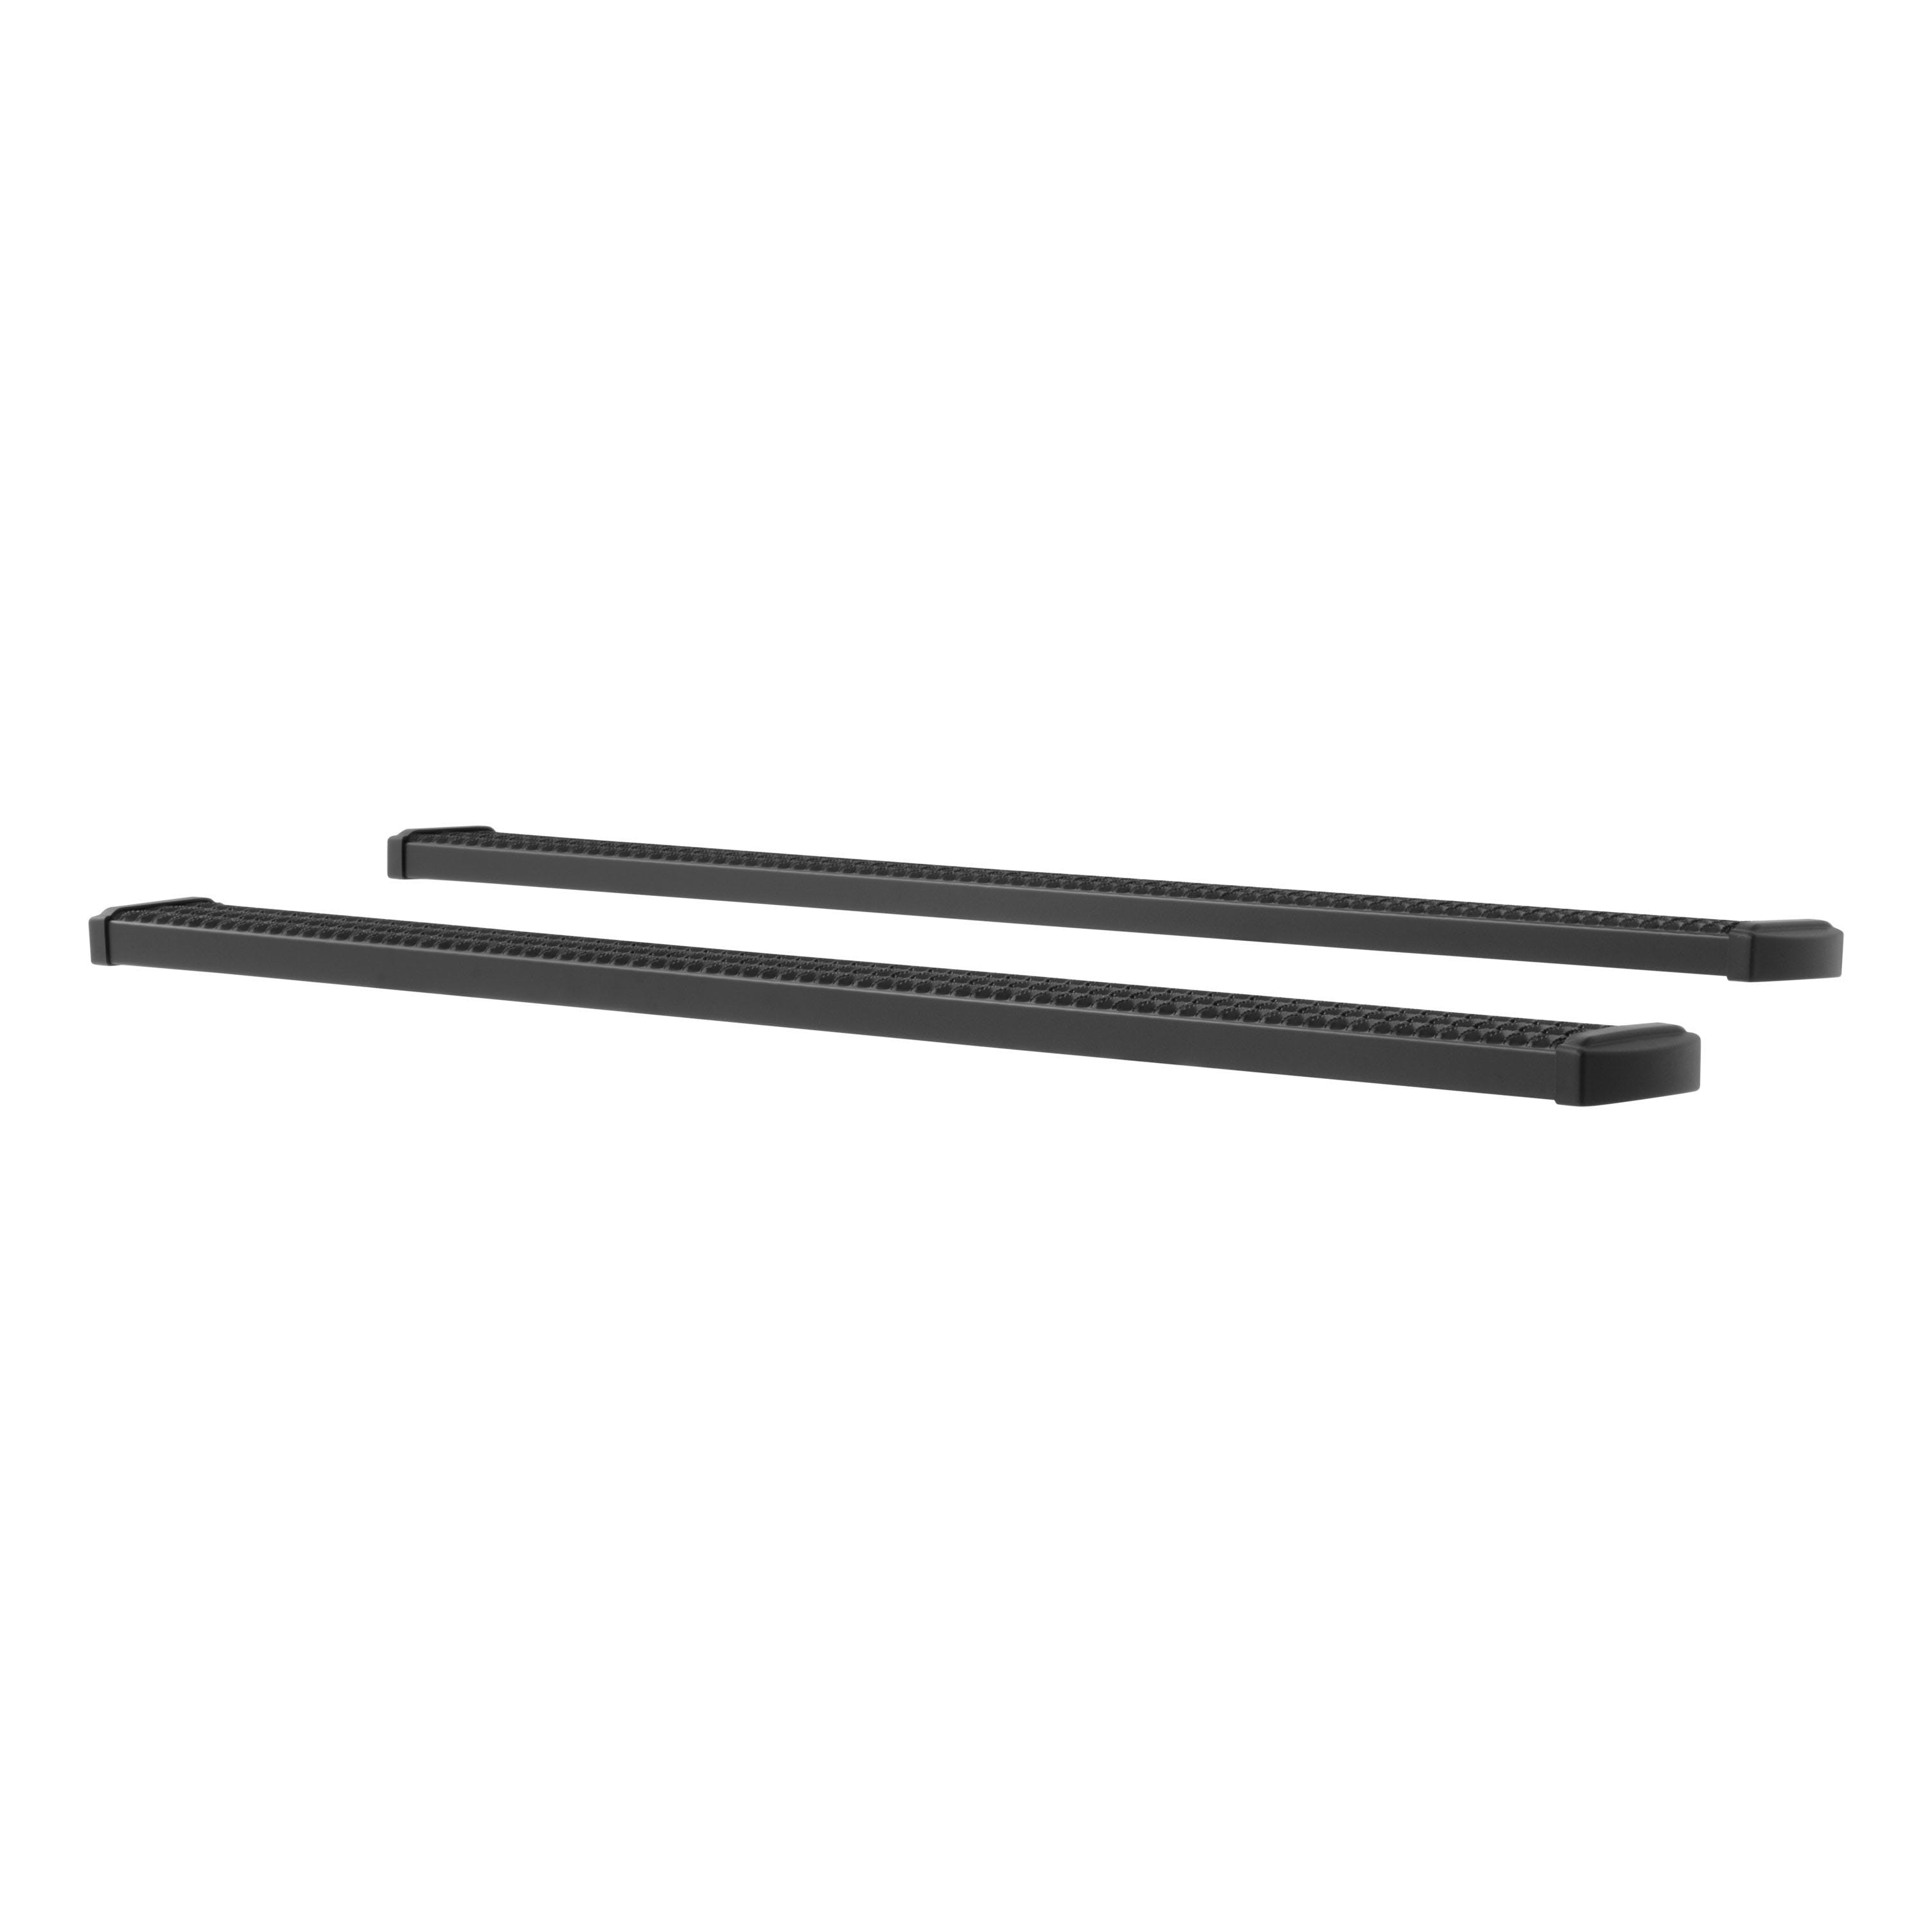 LUVERNE 415088-400922 Grip Step 7 inch Running Boards